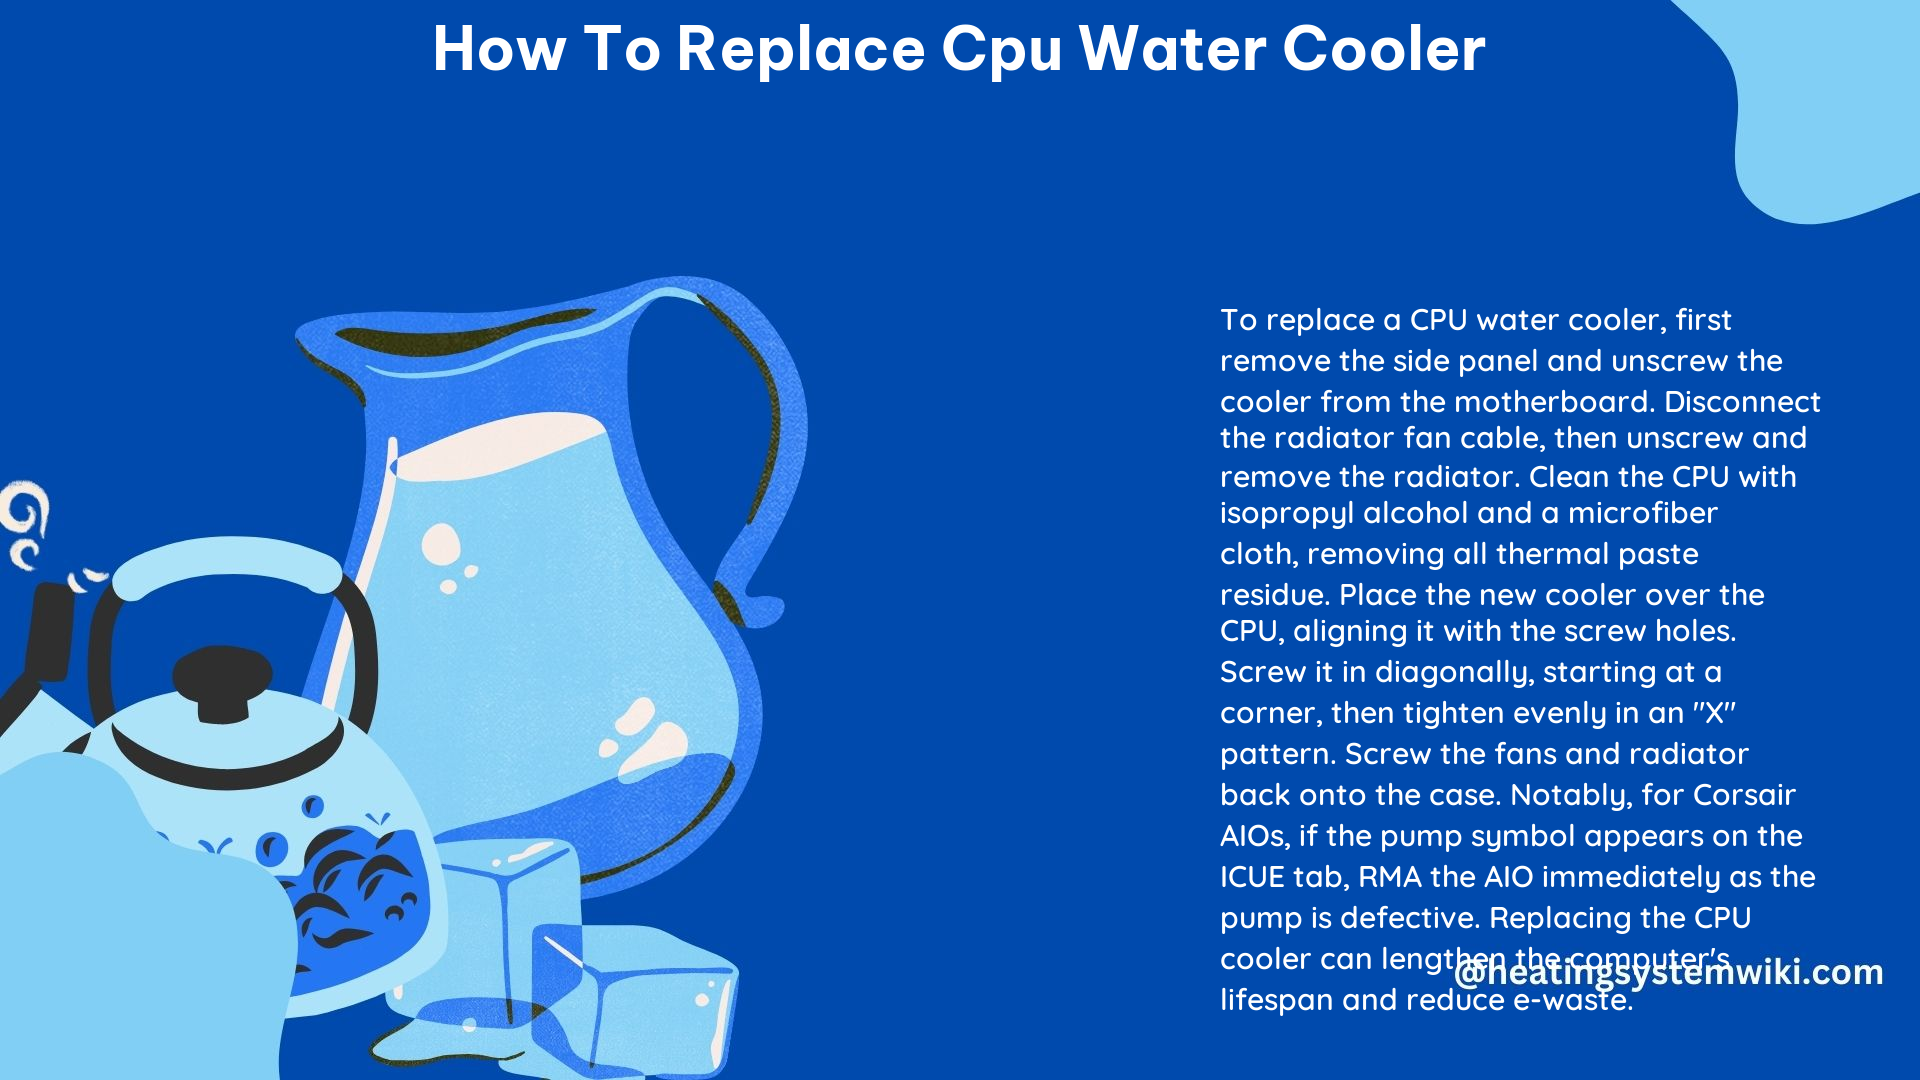 How to Replace CPU Water Cooler